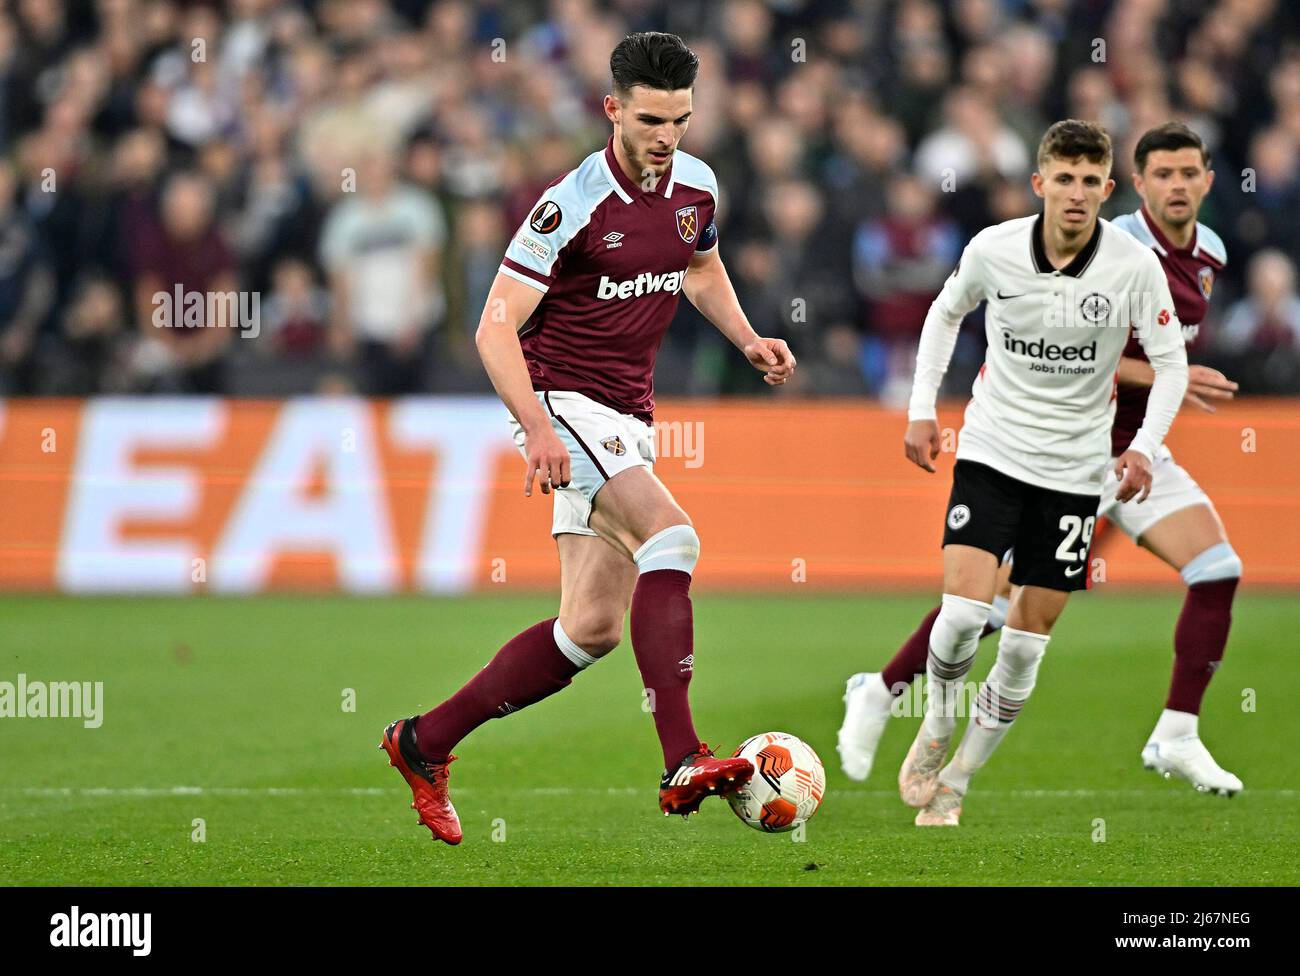 London UK 28th April 2022. Declan Rice (West Ham) during the West Ham vs Eintracht Frankfurt Uefa Europa Cup semi final 1st leg match at the London Stadium, Stratford.Credit: Martin Dalton/Alamy Live News. This Image is for EDITORIAL USE ONLY. Licence required from the the Football DataCo for any other use. Credit: MARTIN DALTON/Alamy Live News Stock Photo